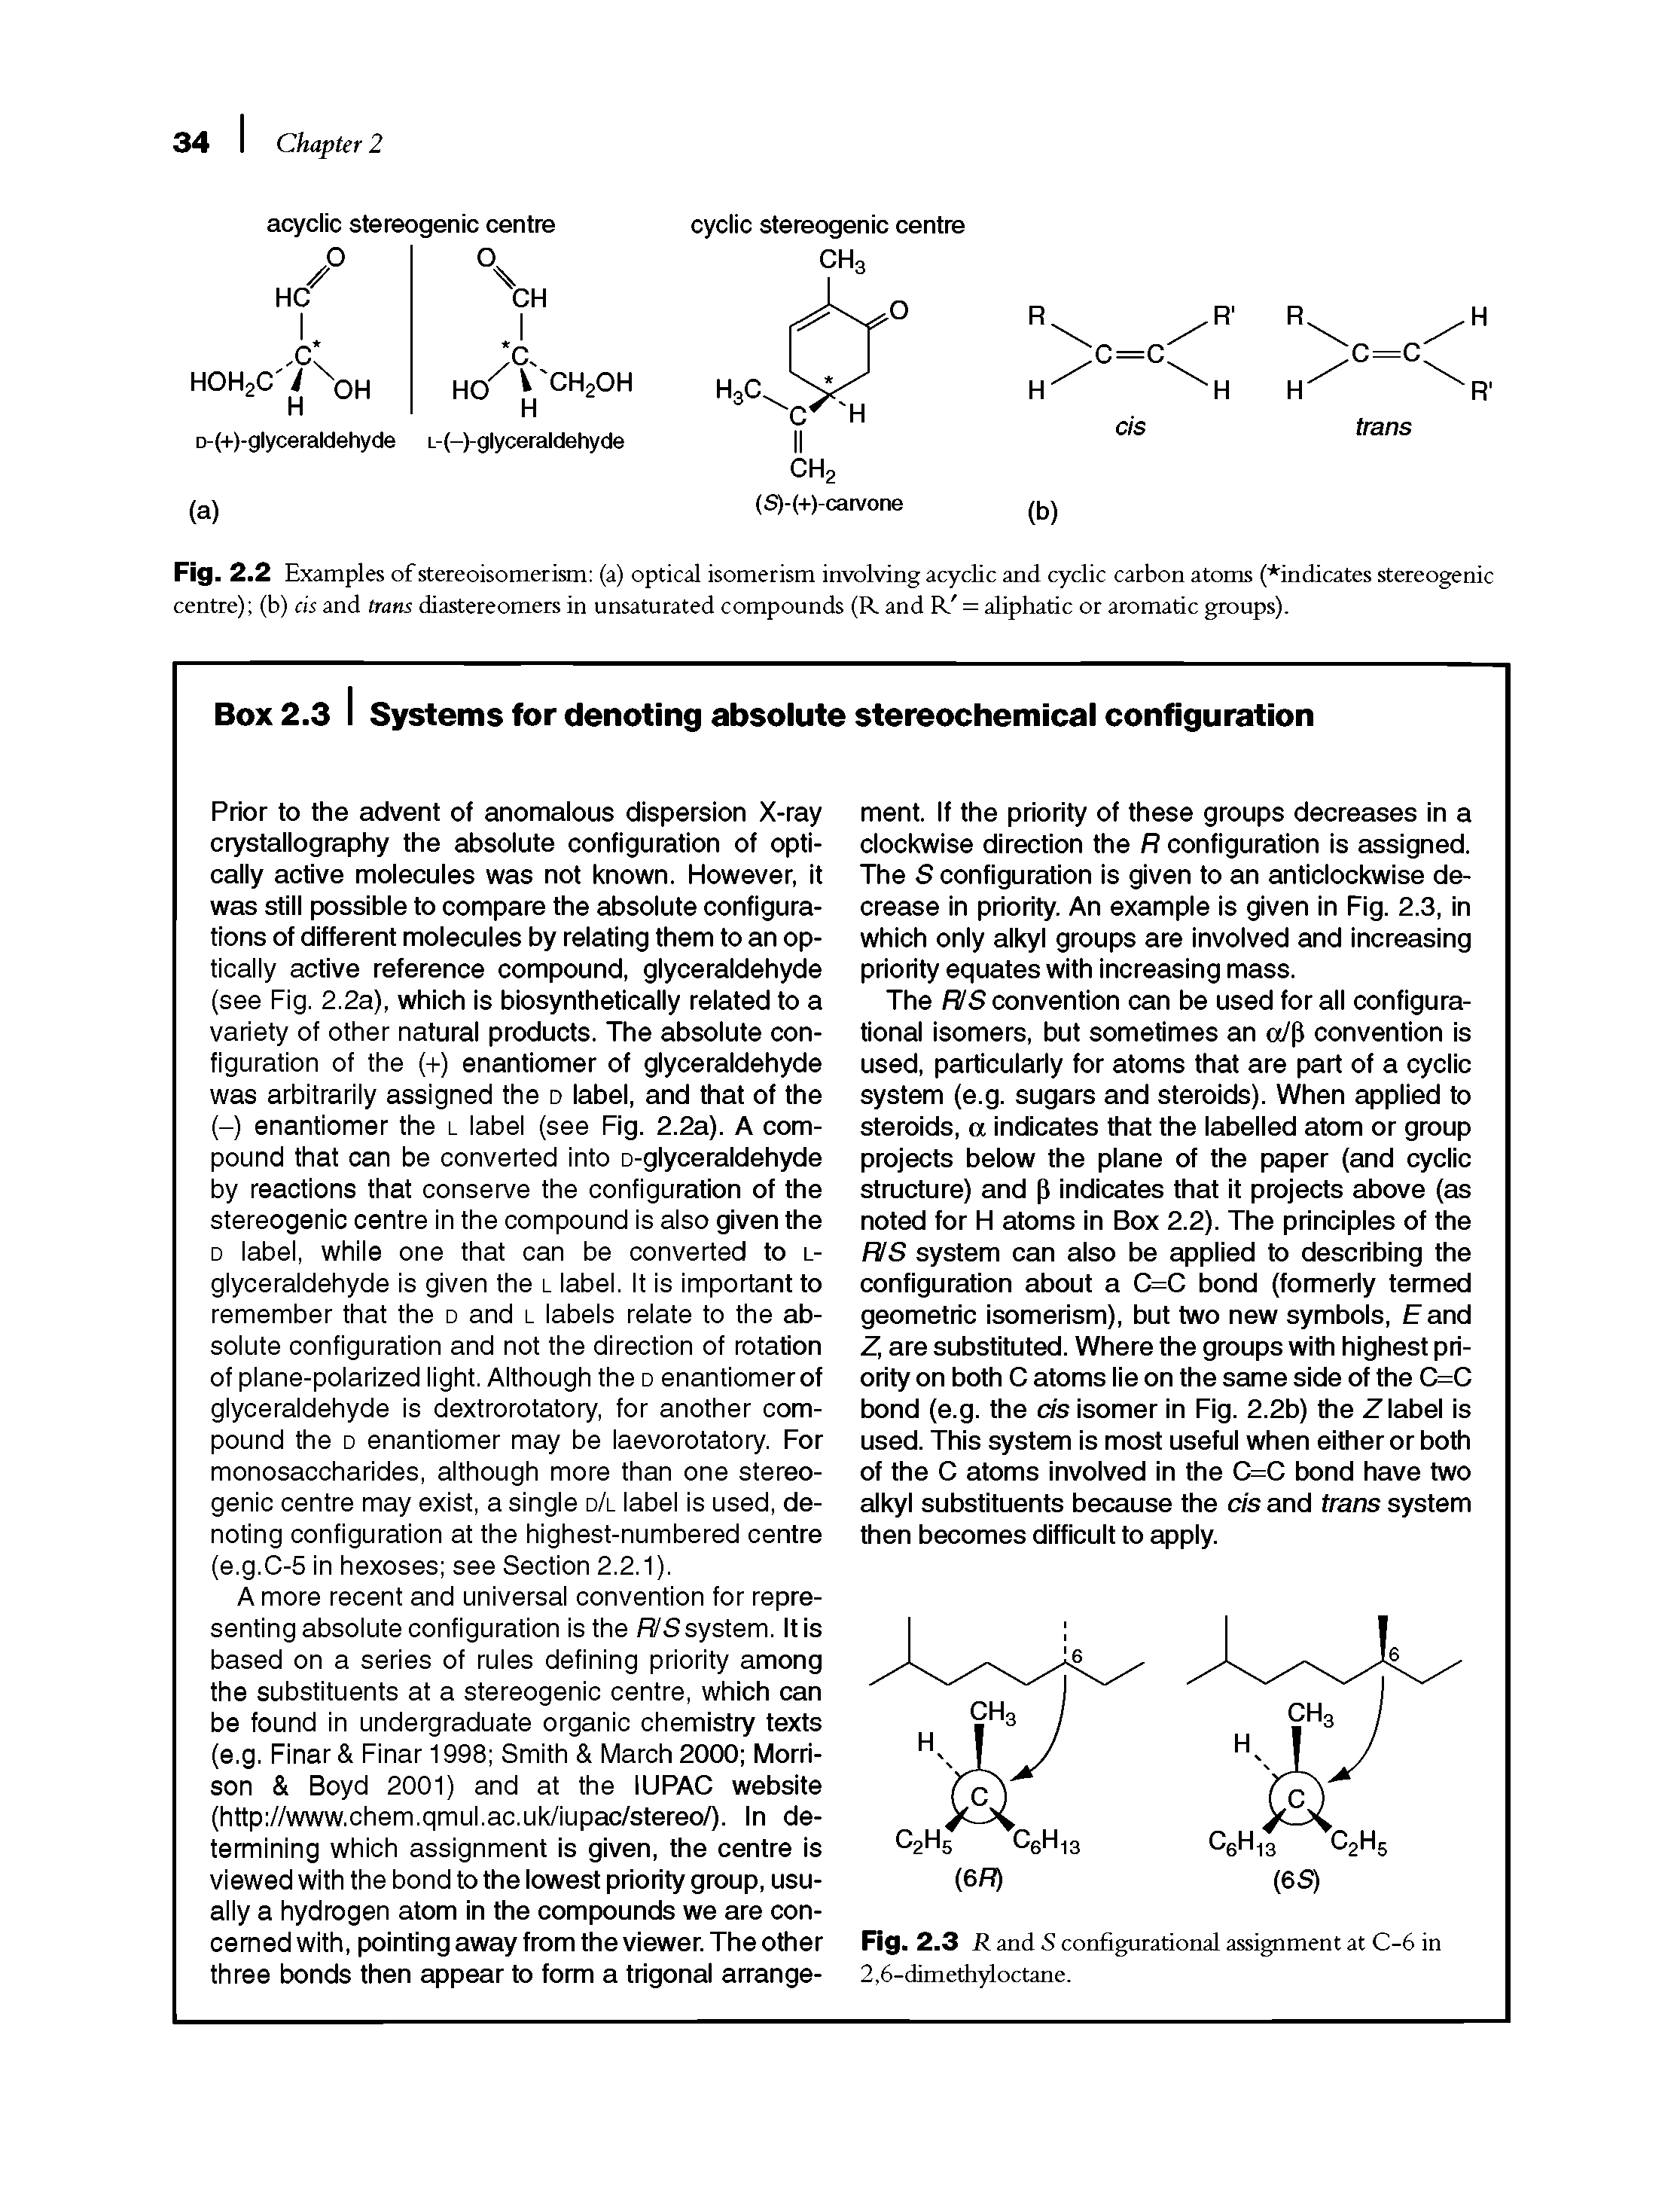 Fig. 2.2 Examples of stereoisomerism (a) optical isomerism involving acyclic and cyclic carbon atoms (indicates stereogenic centre) (b) cis and trans diastereomers in unsaturated compounds (R and R = aliphatic or aromatic groups).